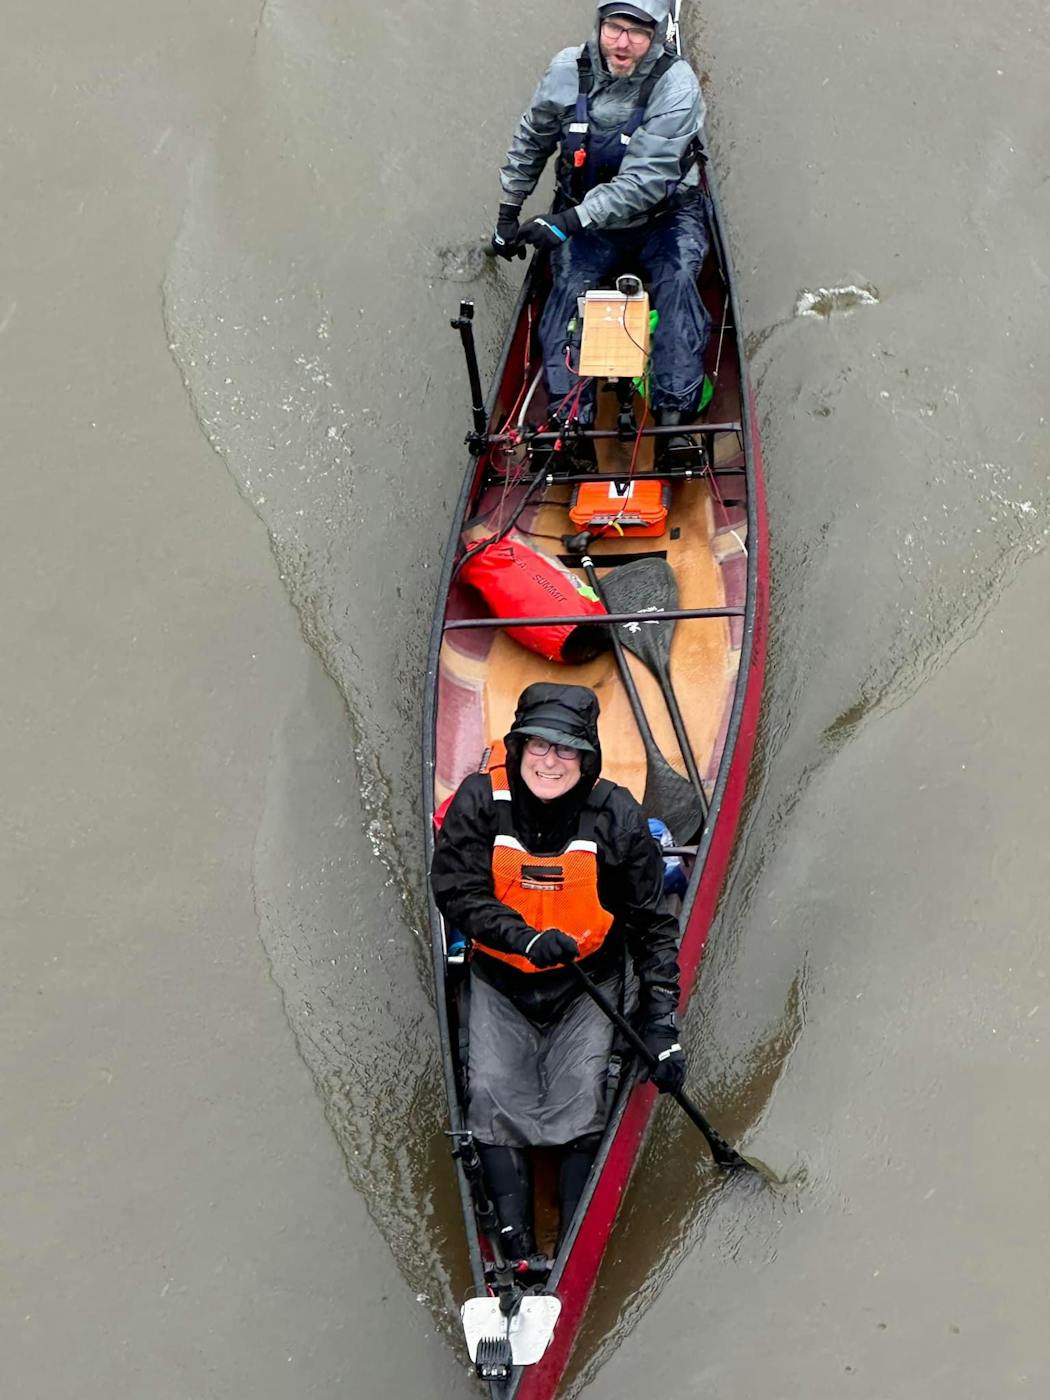 Stalwarts Scott Miller, top, and Scott Duffus aim to set out May 9 and paddle the length of the Minnesota River. Their goal is to complete it with a 